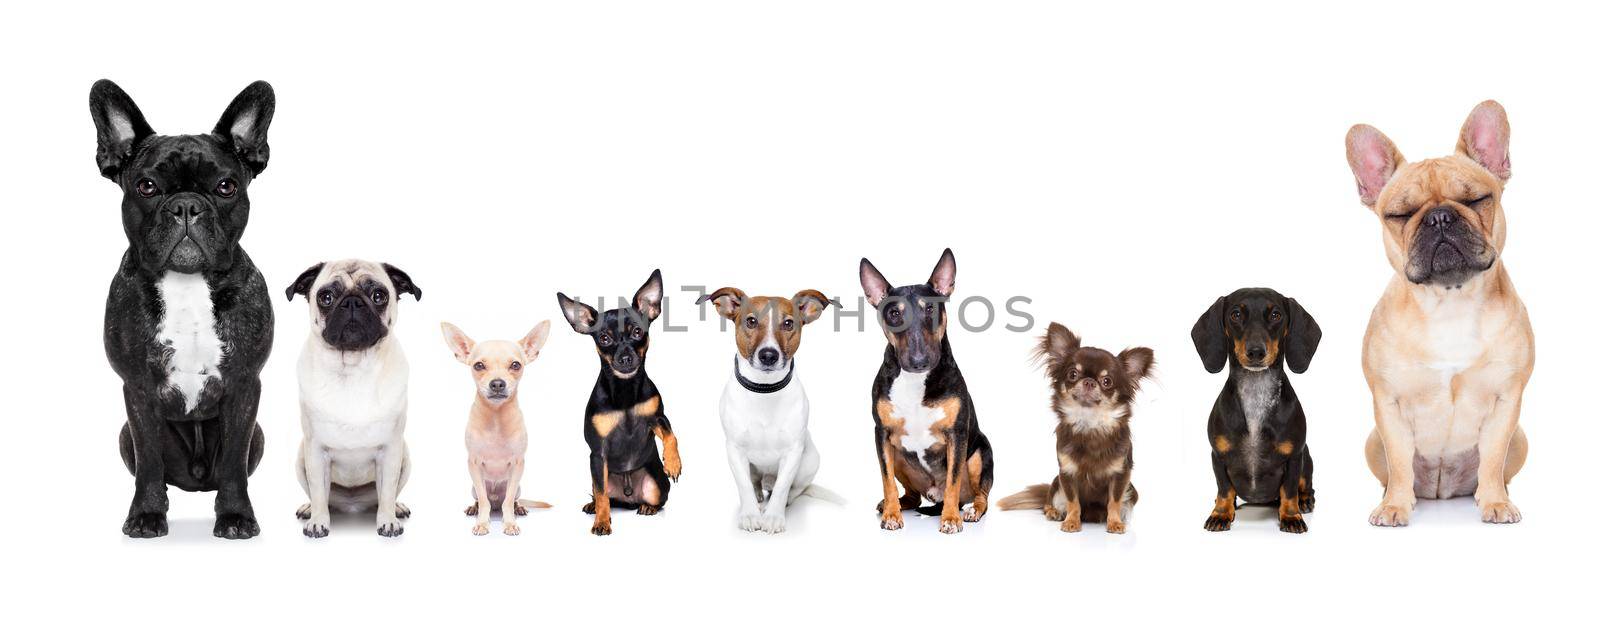 group row  of dogs by Brosch